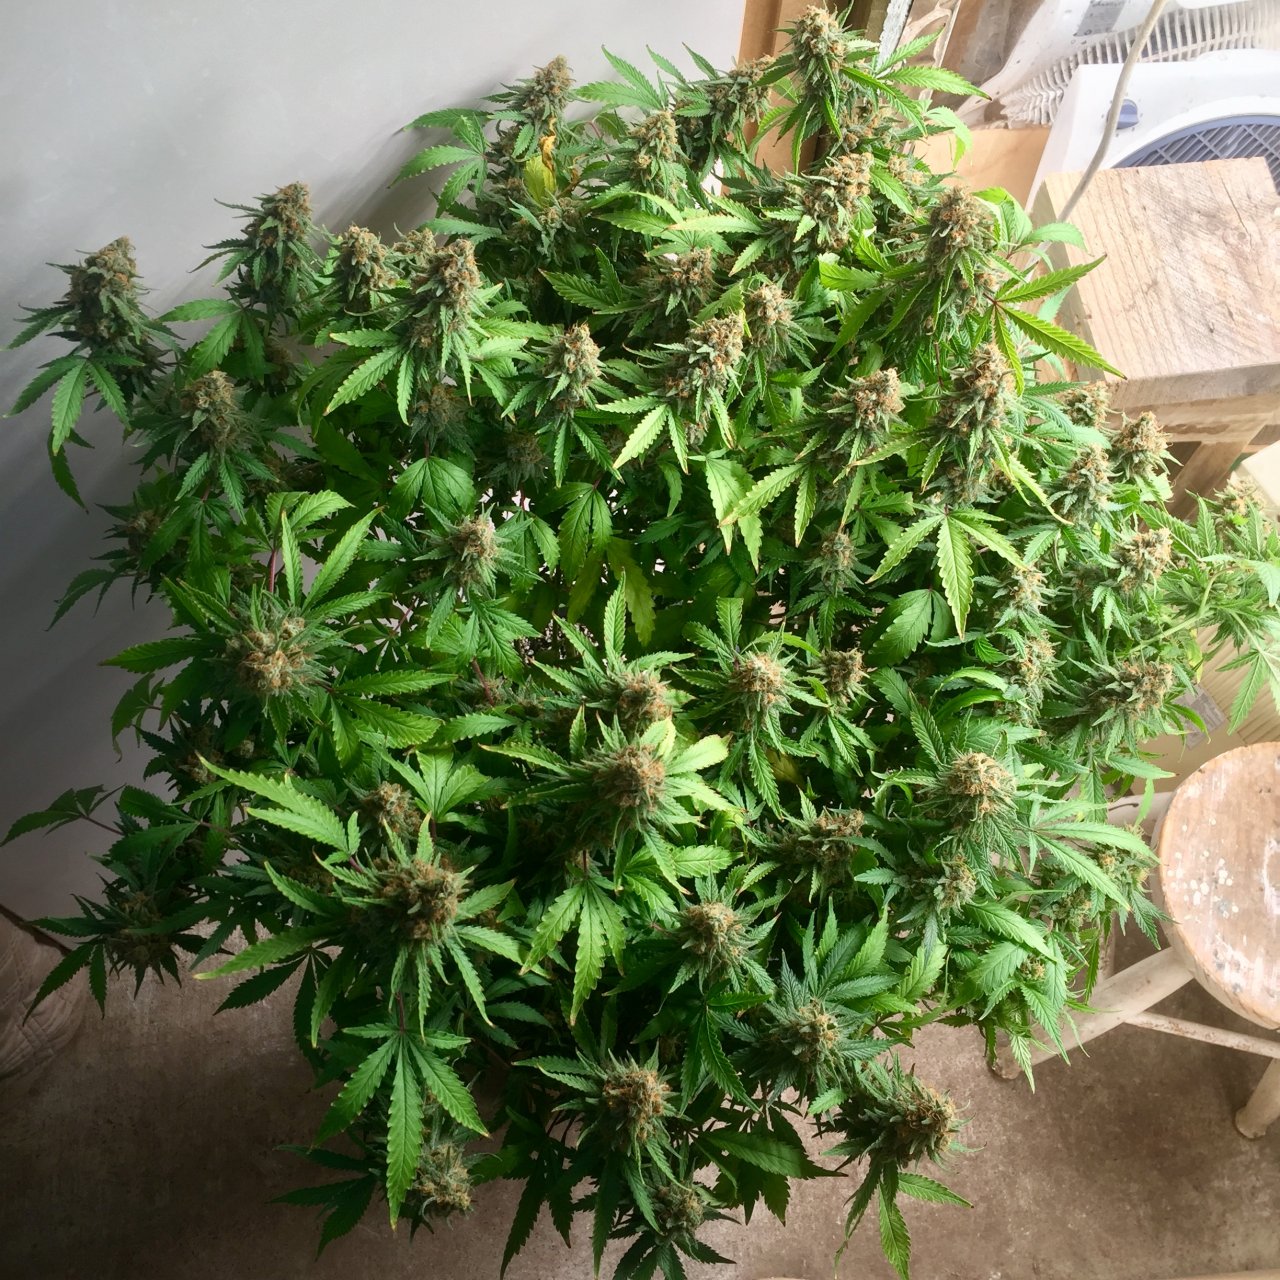 GSC, day 68